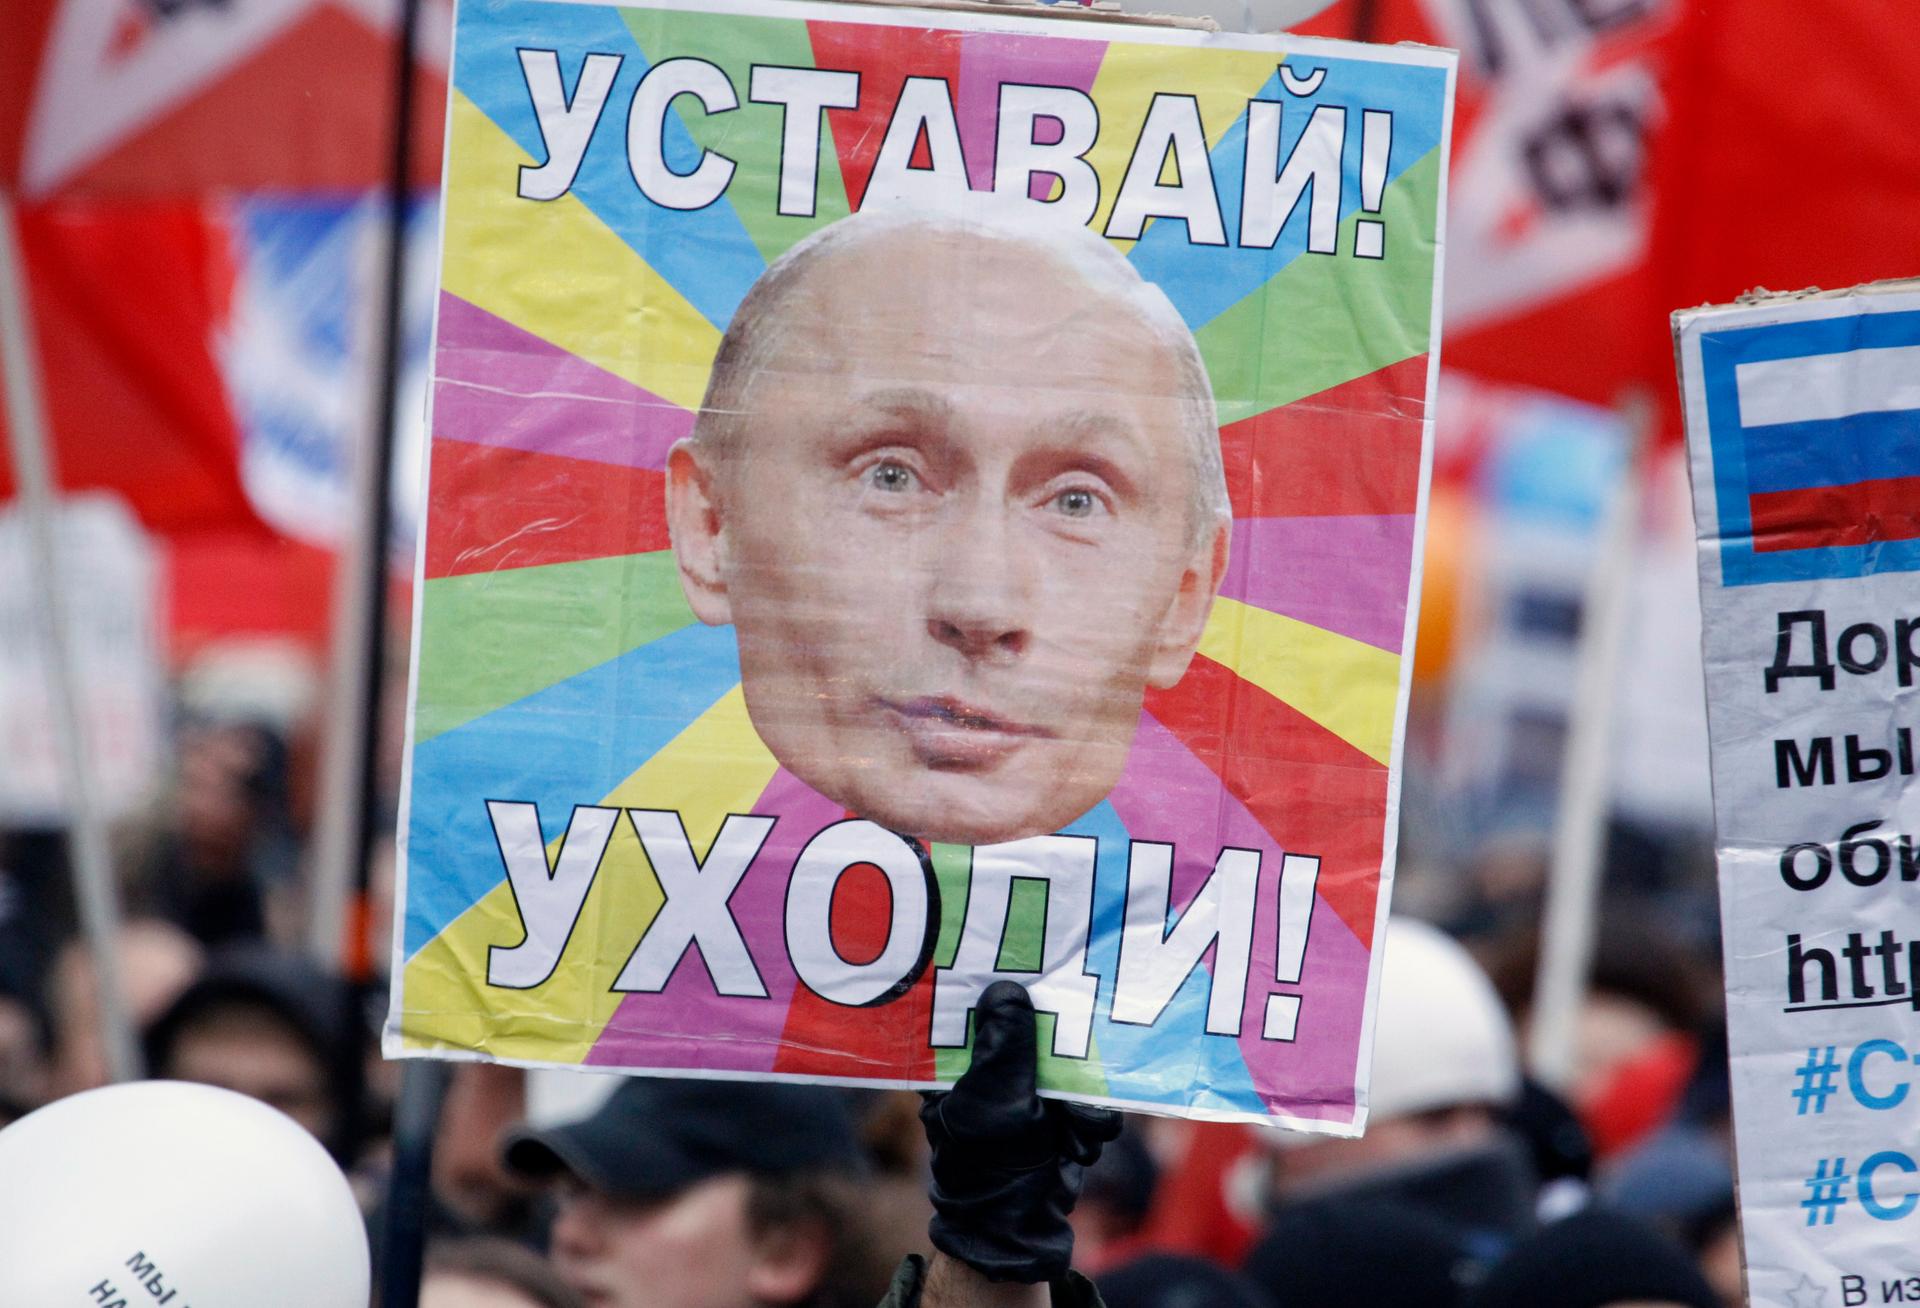 Anti-government Russian demonstrators took to the streets in Decembe, 2011, increasing pressure on Vladimir Putin as he sought a new term as Russian president. The placard reads "Get tired! Leave!"